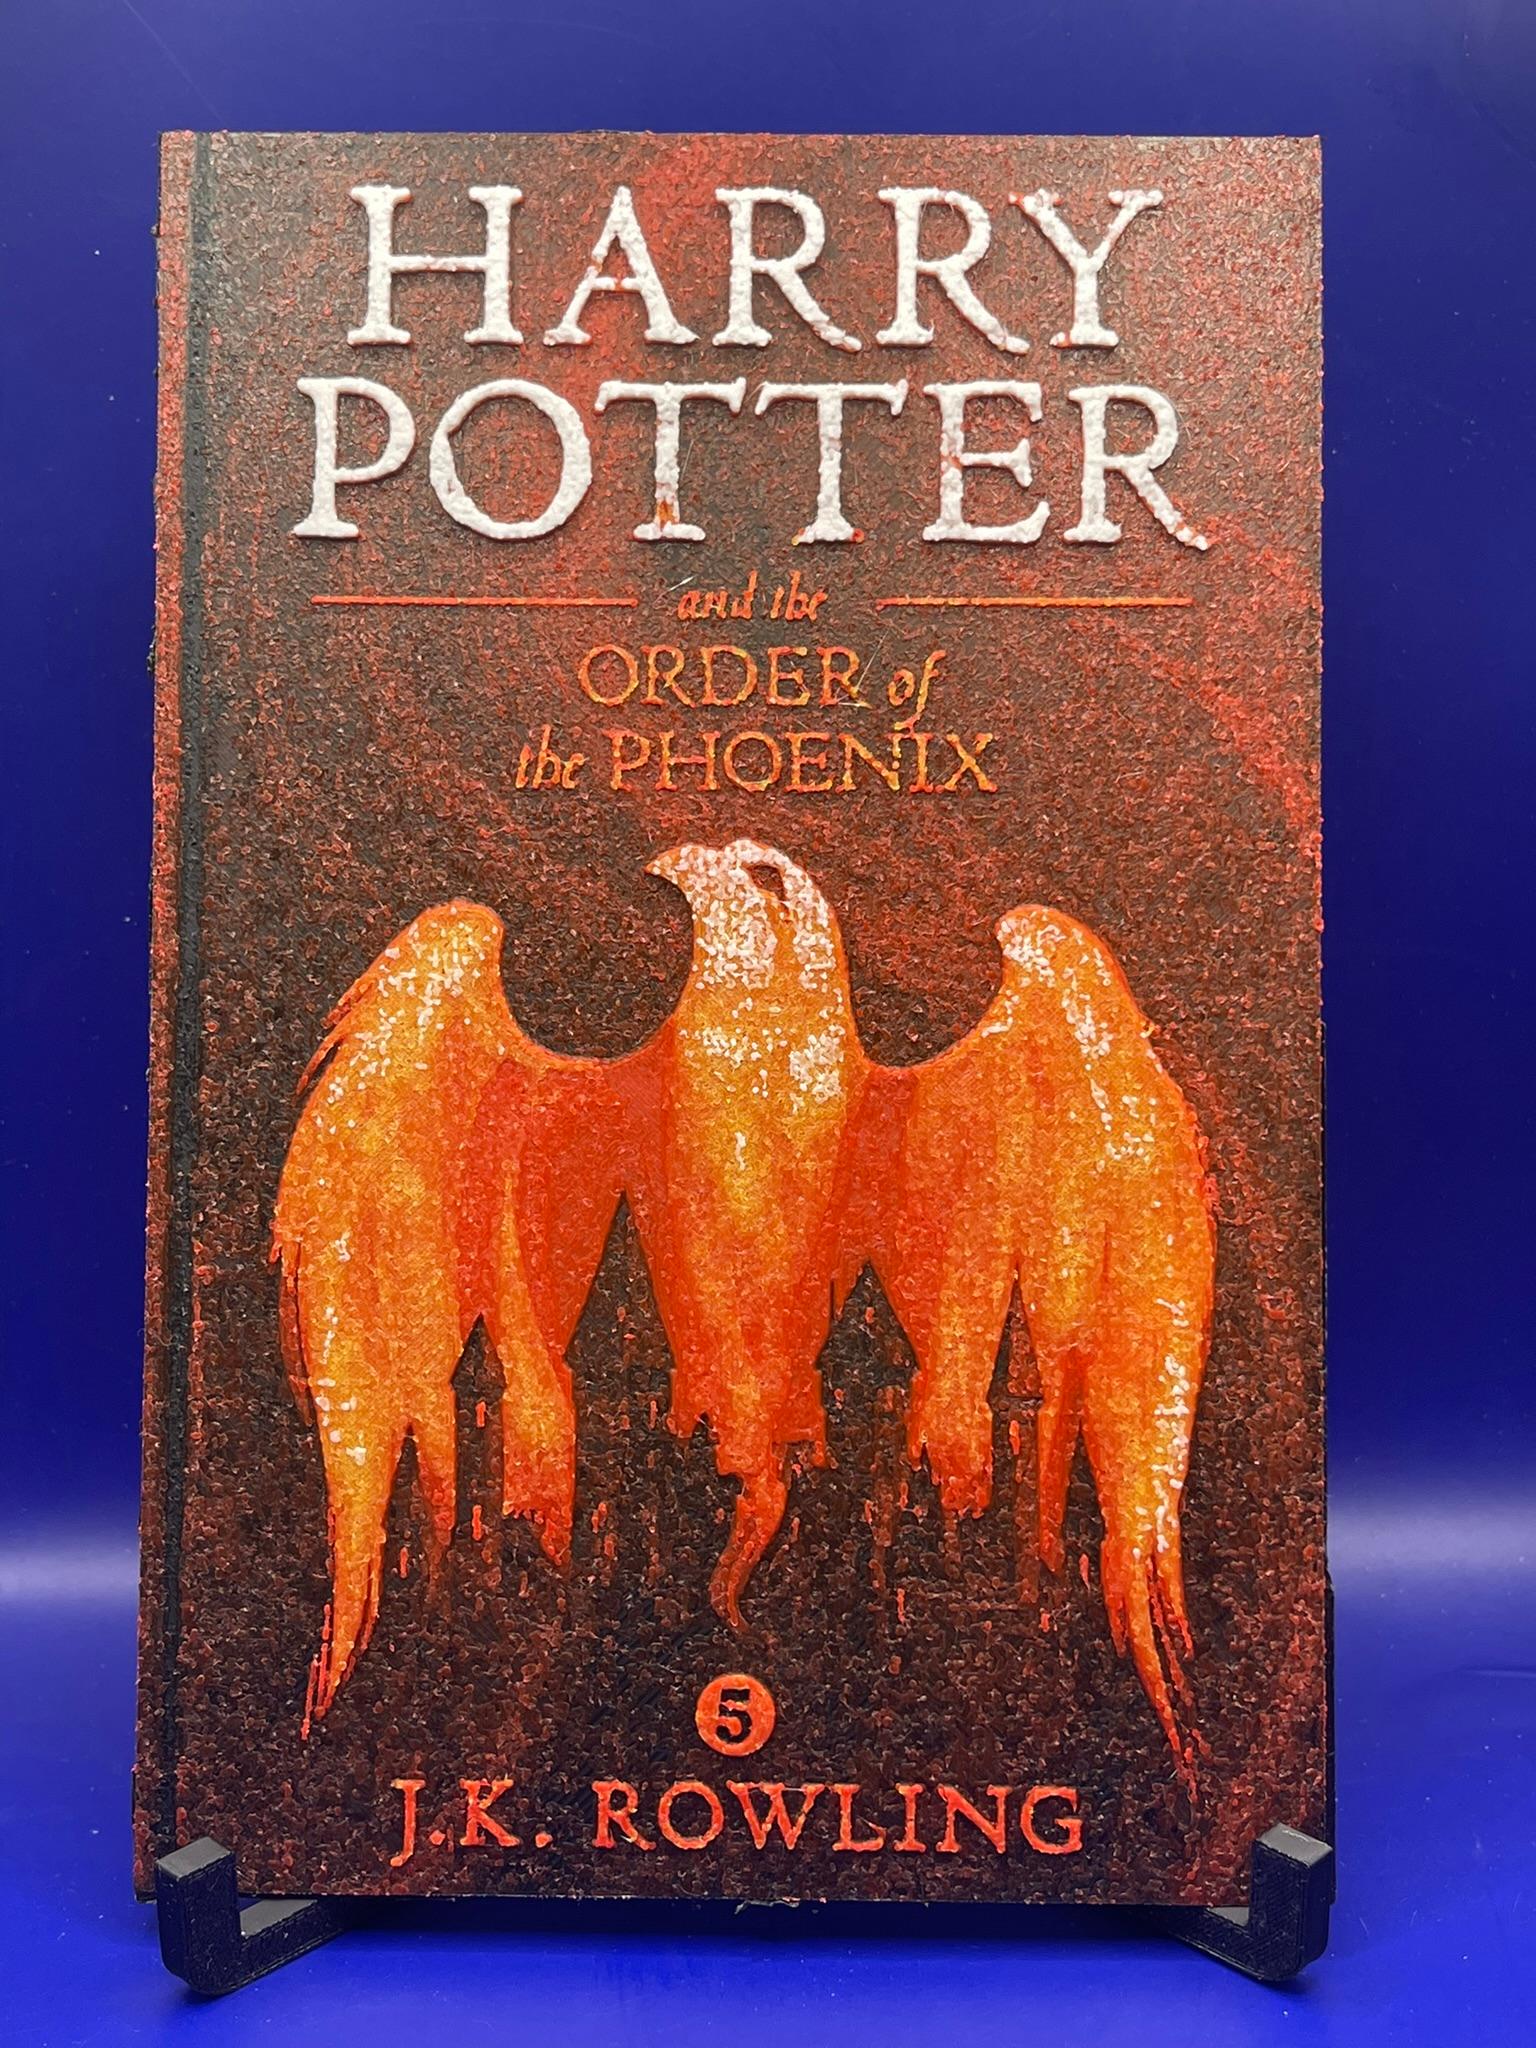 Harry Potter and the Order of the Phoenix HueForge Book Cover Fan Art 3d model